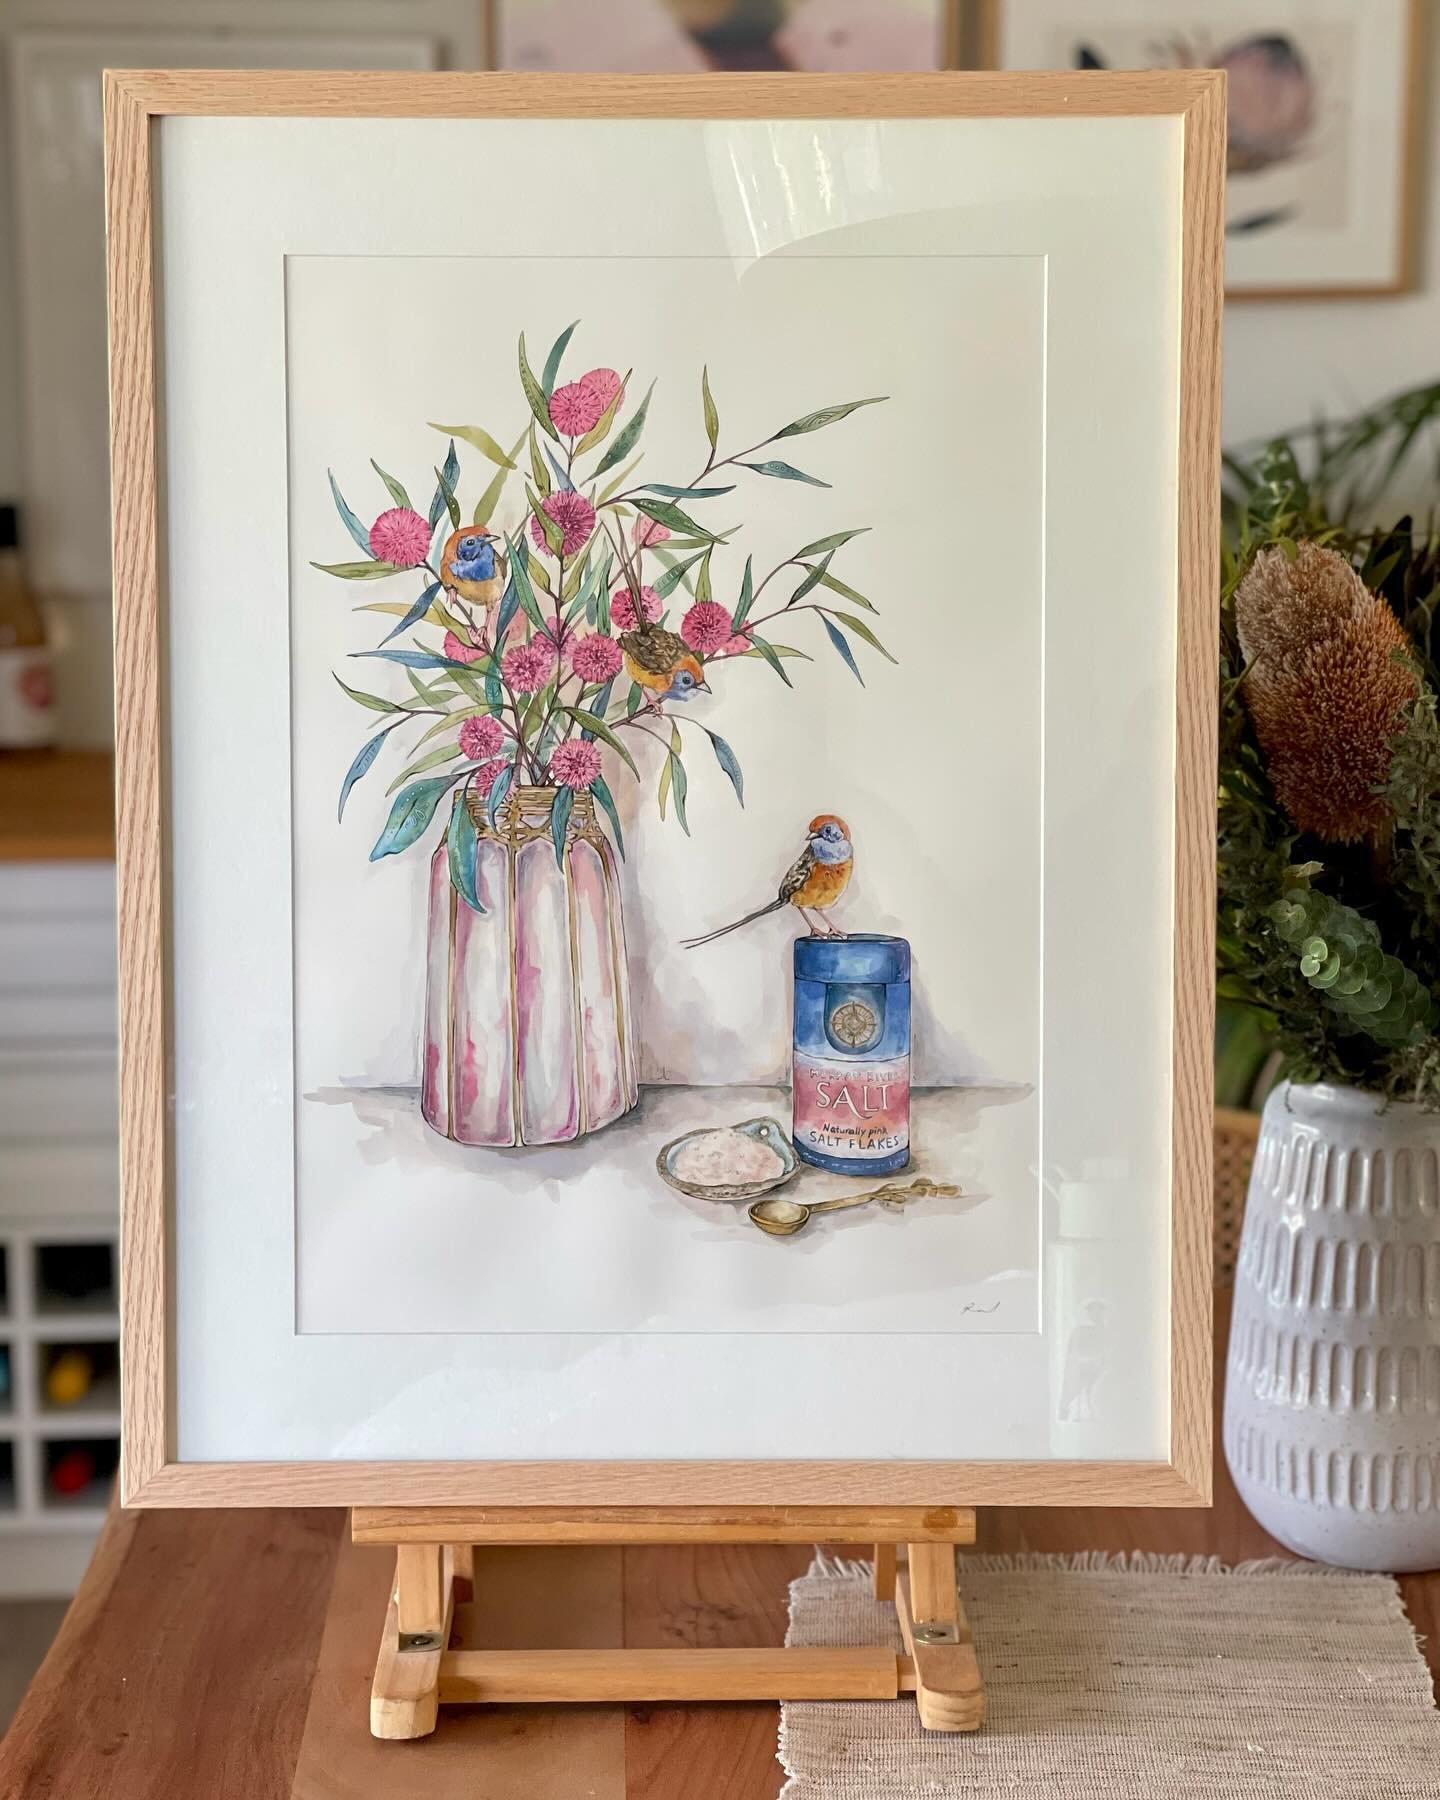 Artworks from &lsquo;Abloom&rsquo; are now up on the website! Even better, they&rsquo;re currently 10% off. Go on, pick out some wall candy for your home. You deserve it 😉🌸🌿

#originalartcollector #originalart #artforsale #artforyourhome #artforth